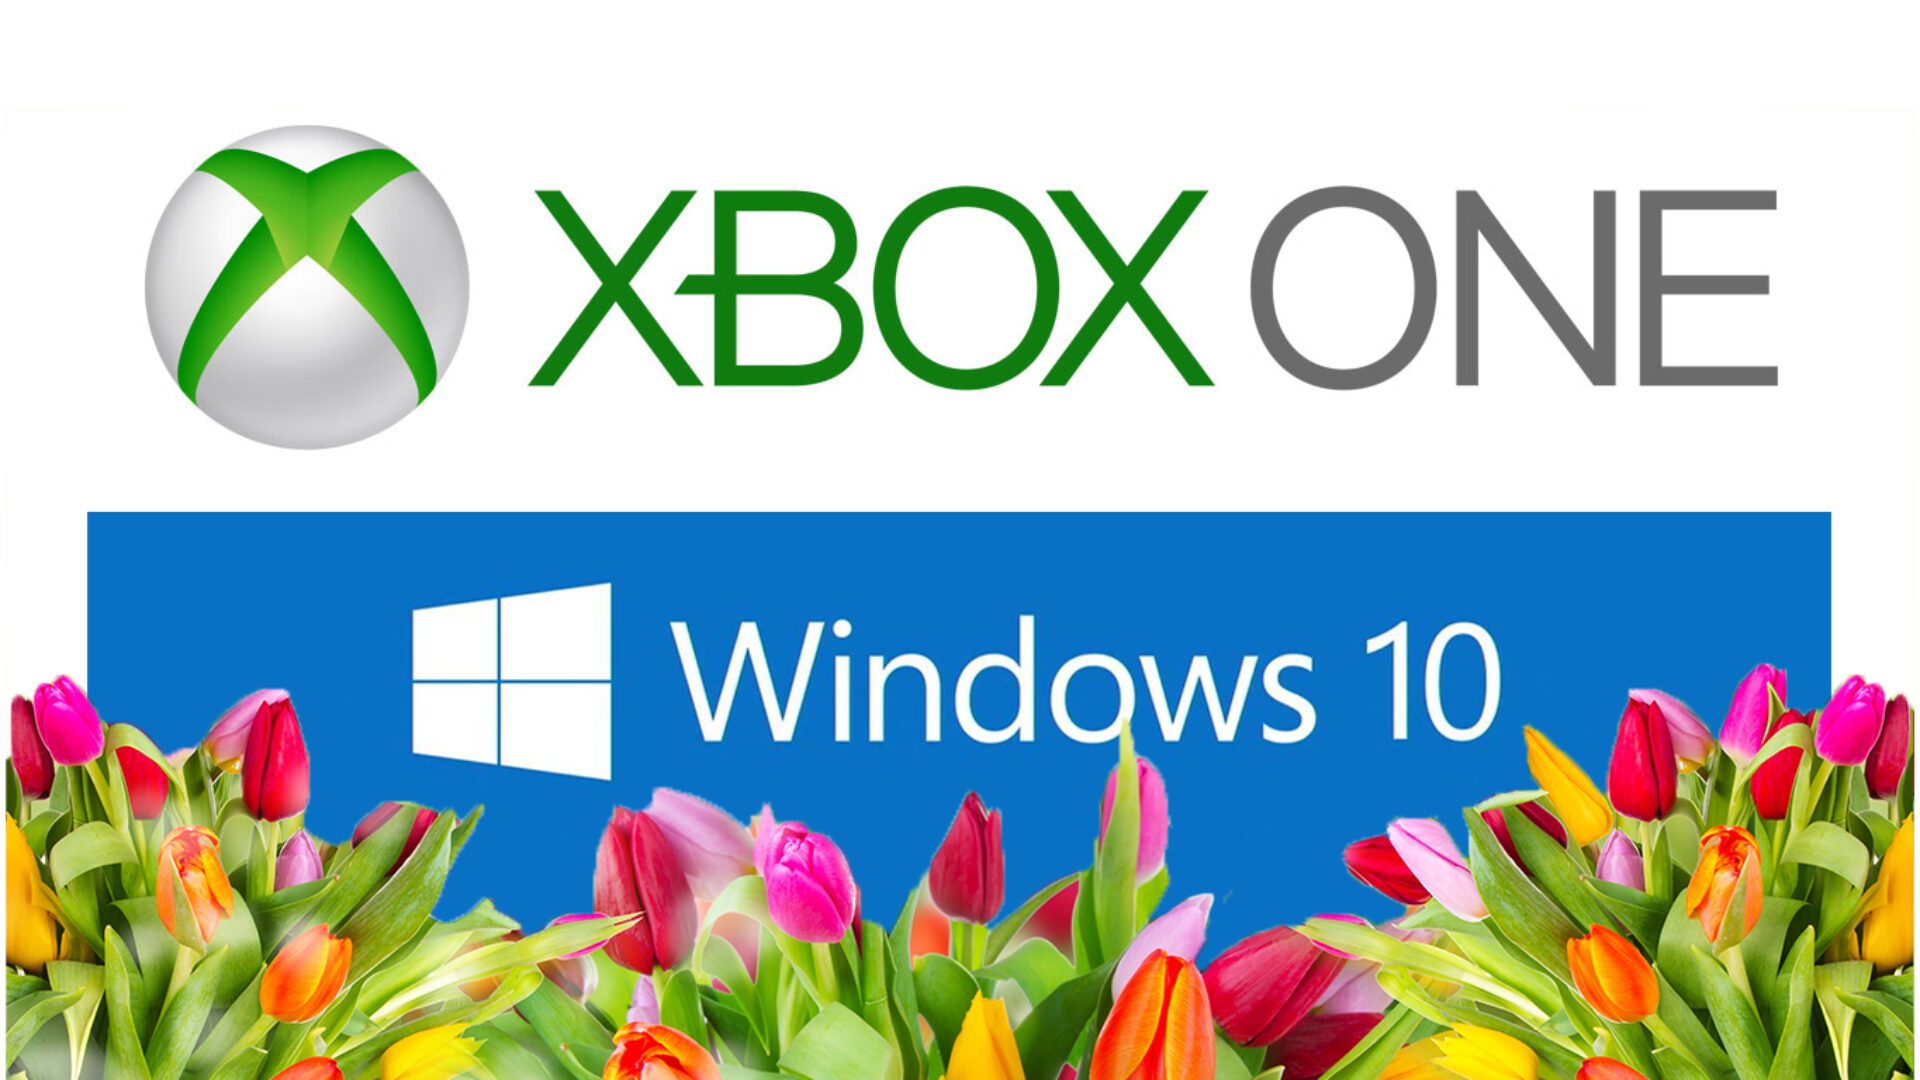 Exciting! Expect Big Experiences this Spring on Xbox One and Windows 10